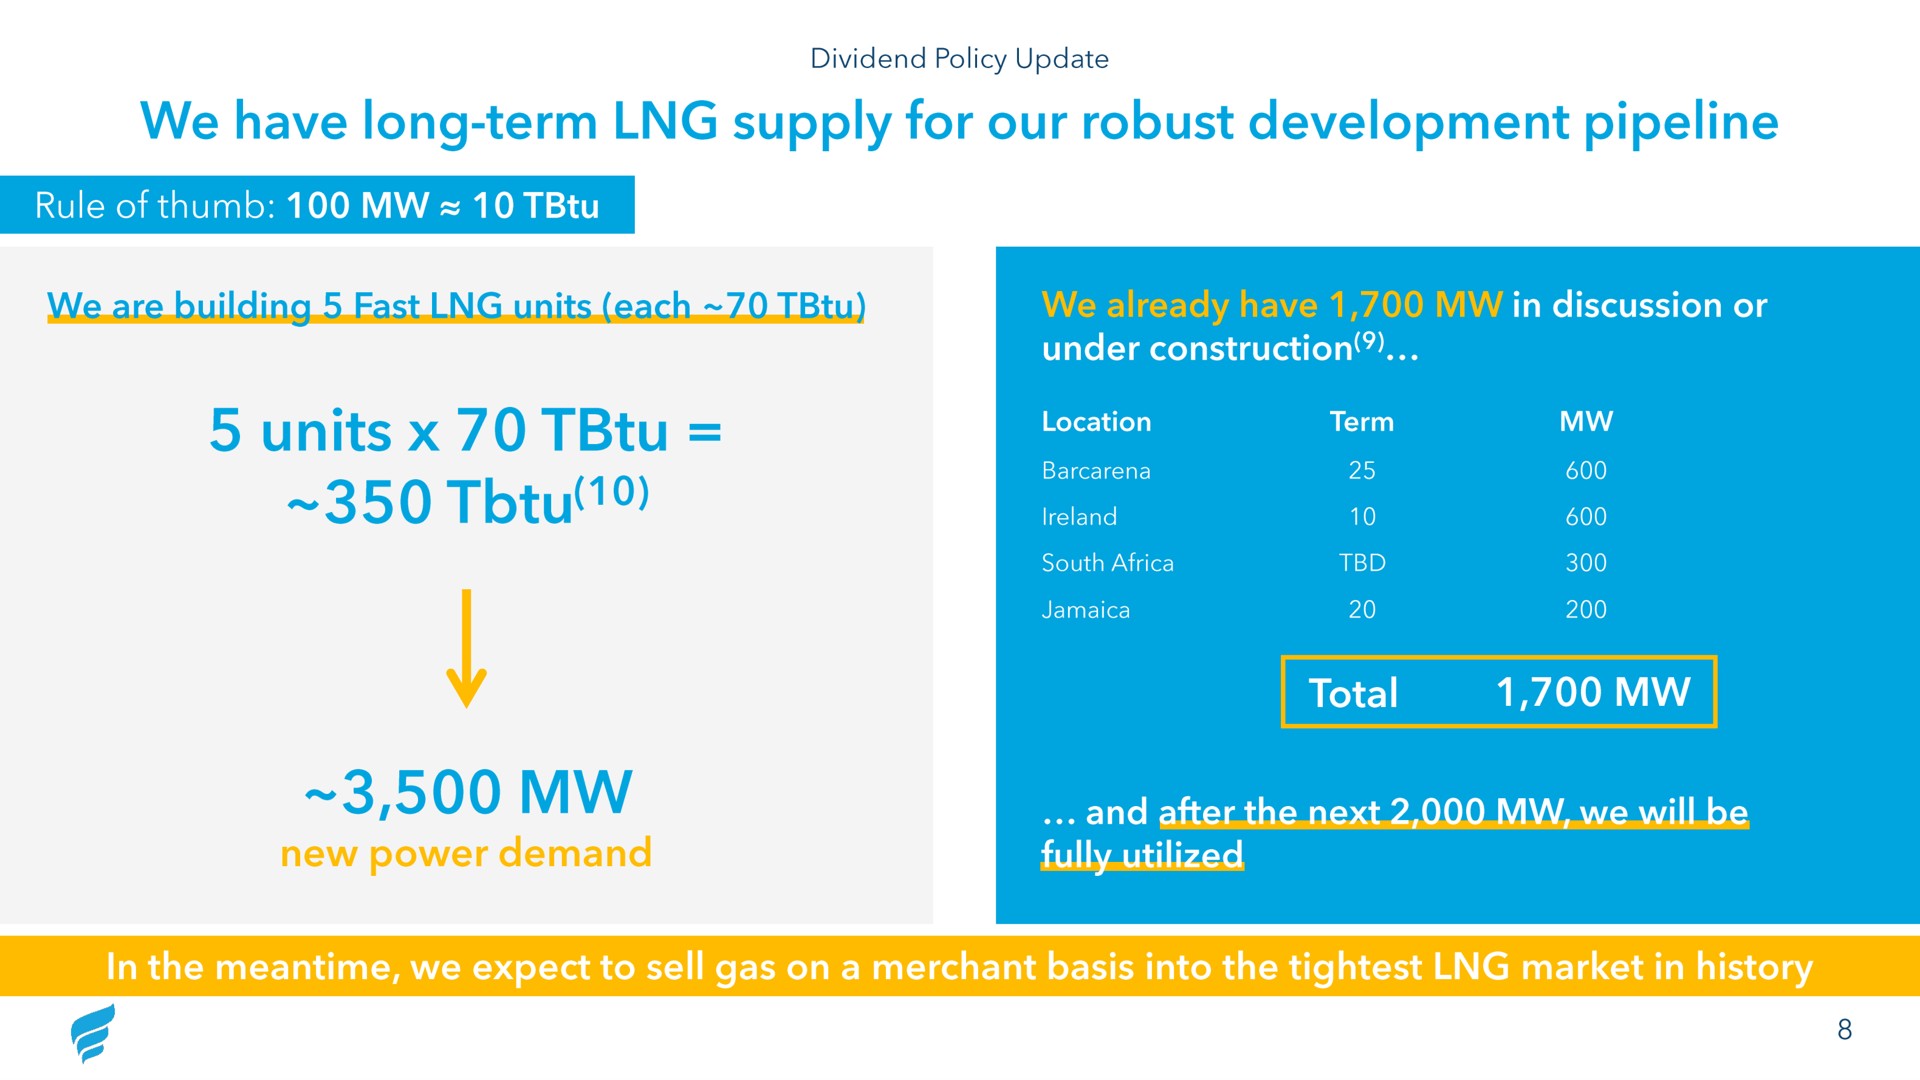 we have long term supply for our robust development pipeline rule of thumb building fast units each in discussion or fully utilized in the we expect to sell gas on a merchant basis into the market in history new power demand and after the next we will be total | NewFortress Energy